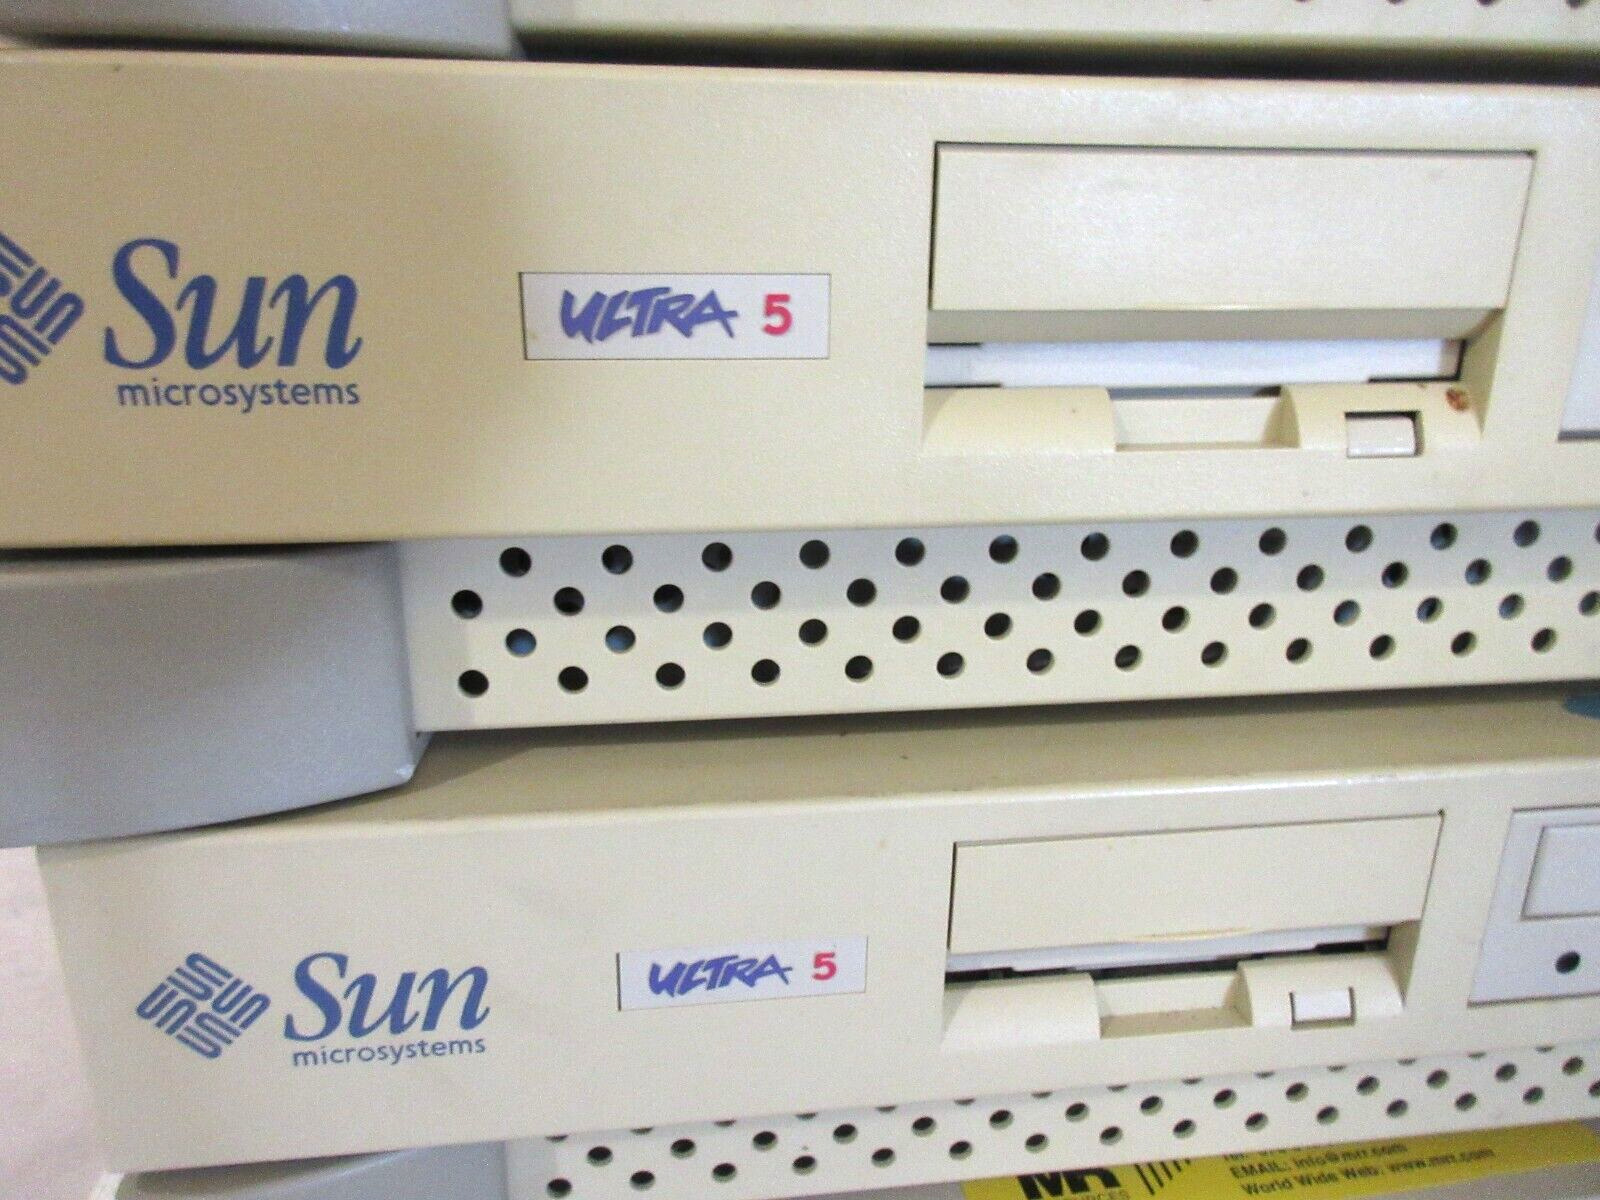 x1 Sun Microsystems Ultra 5 sparcstation (Mostly complete some missing CD Rom)